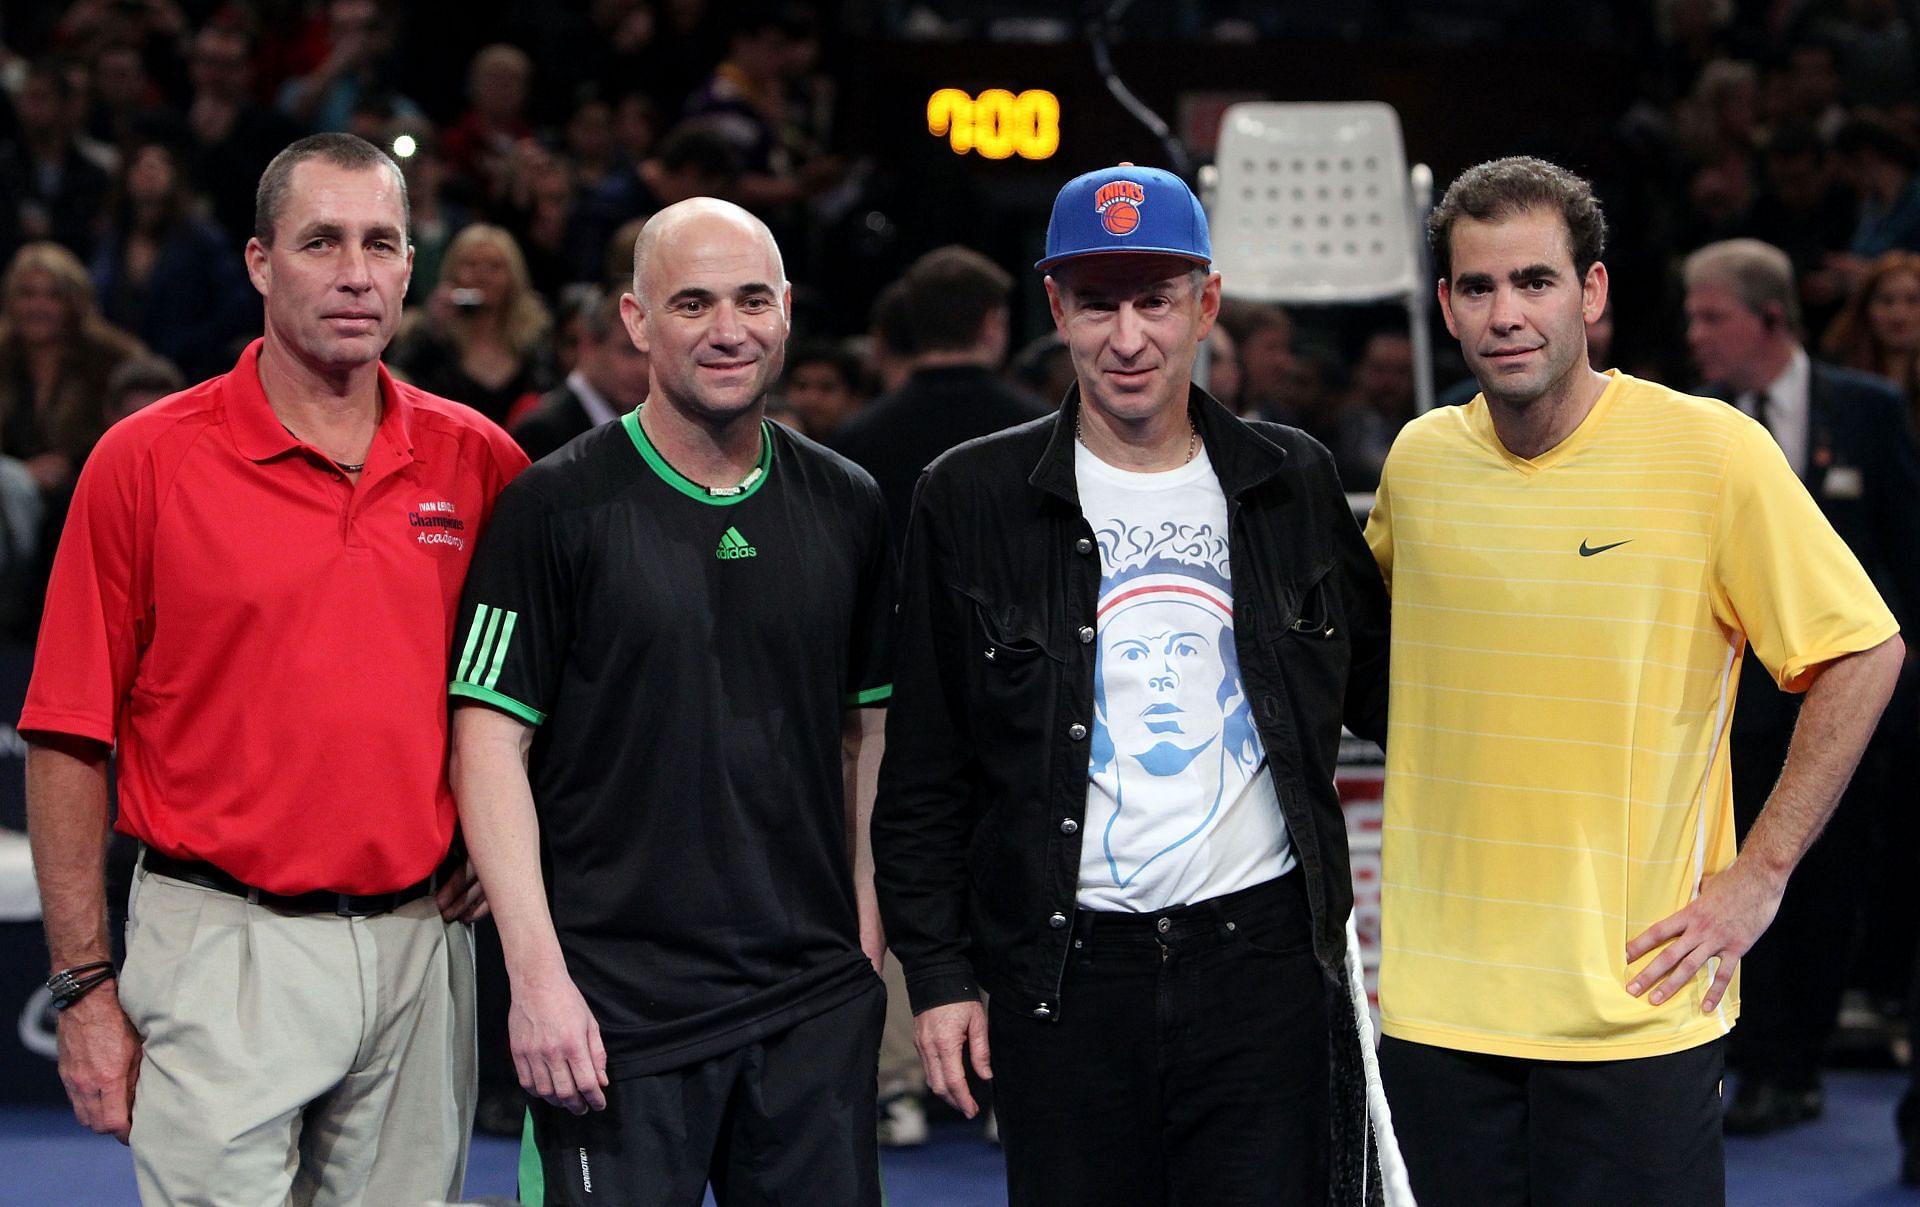 Andre Agassi (second left) and Pete Sampras (extreme right)